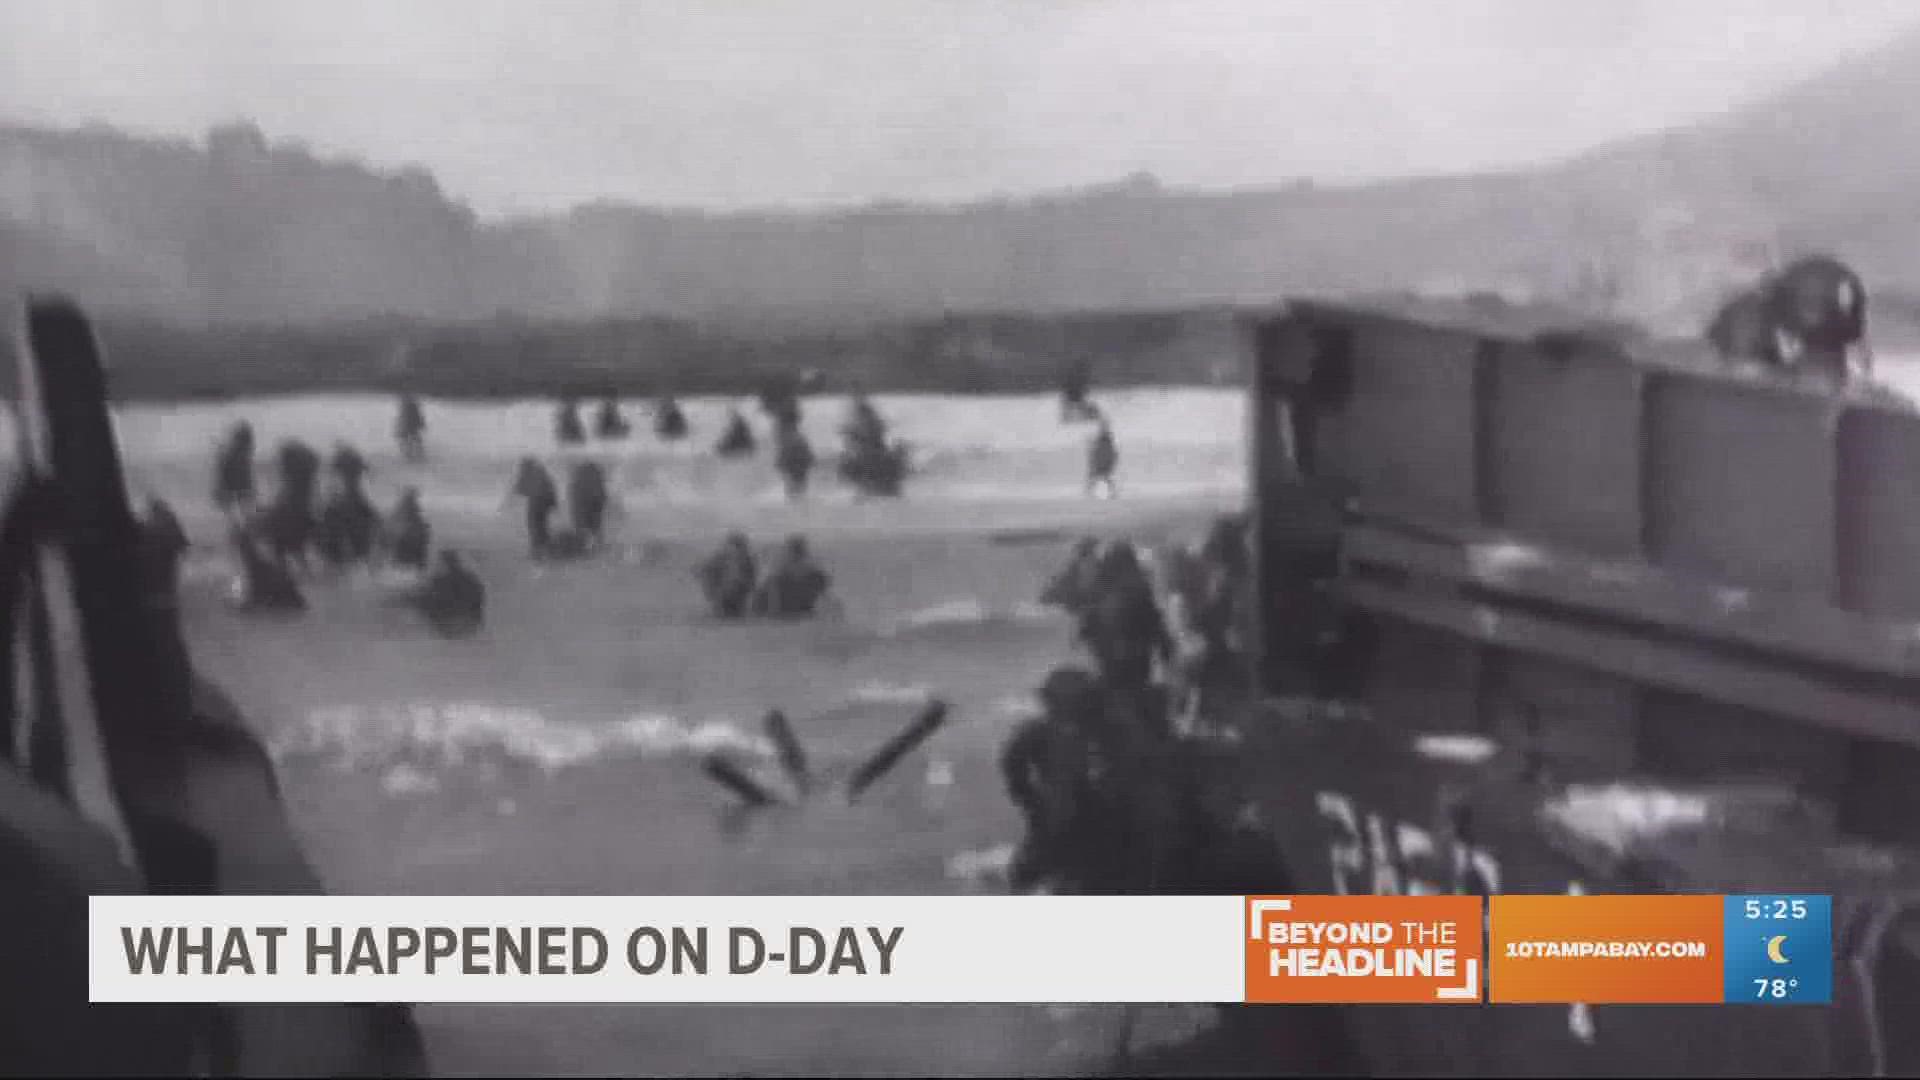 Monday marks the 78th anniversary of D-Day.